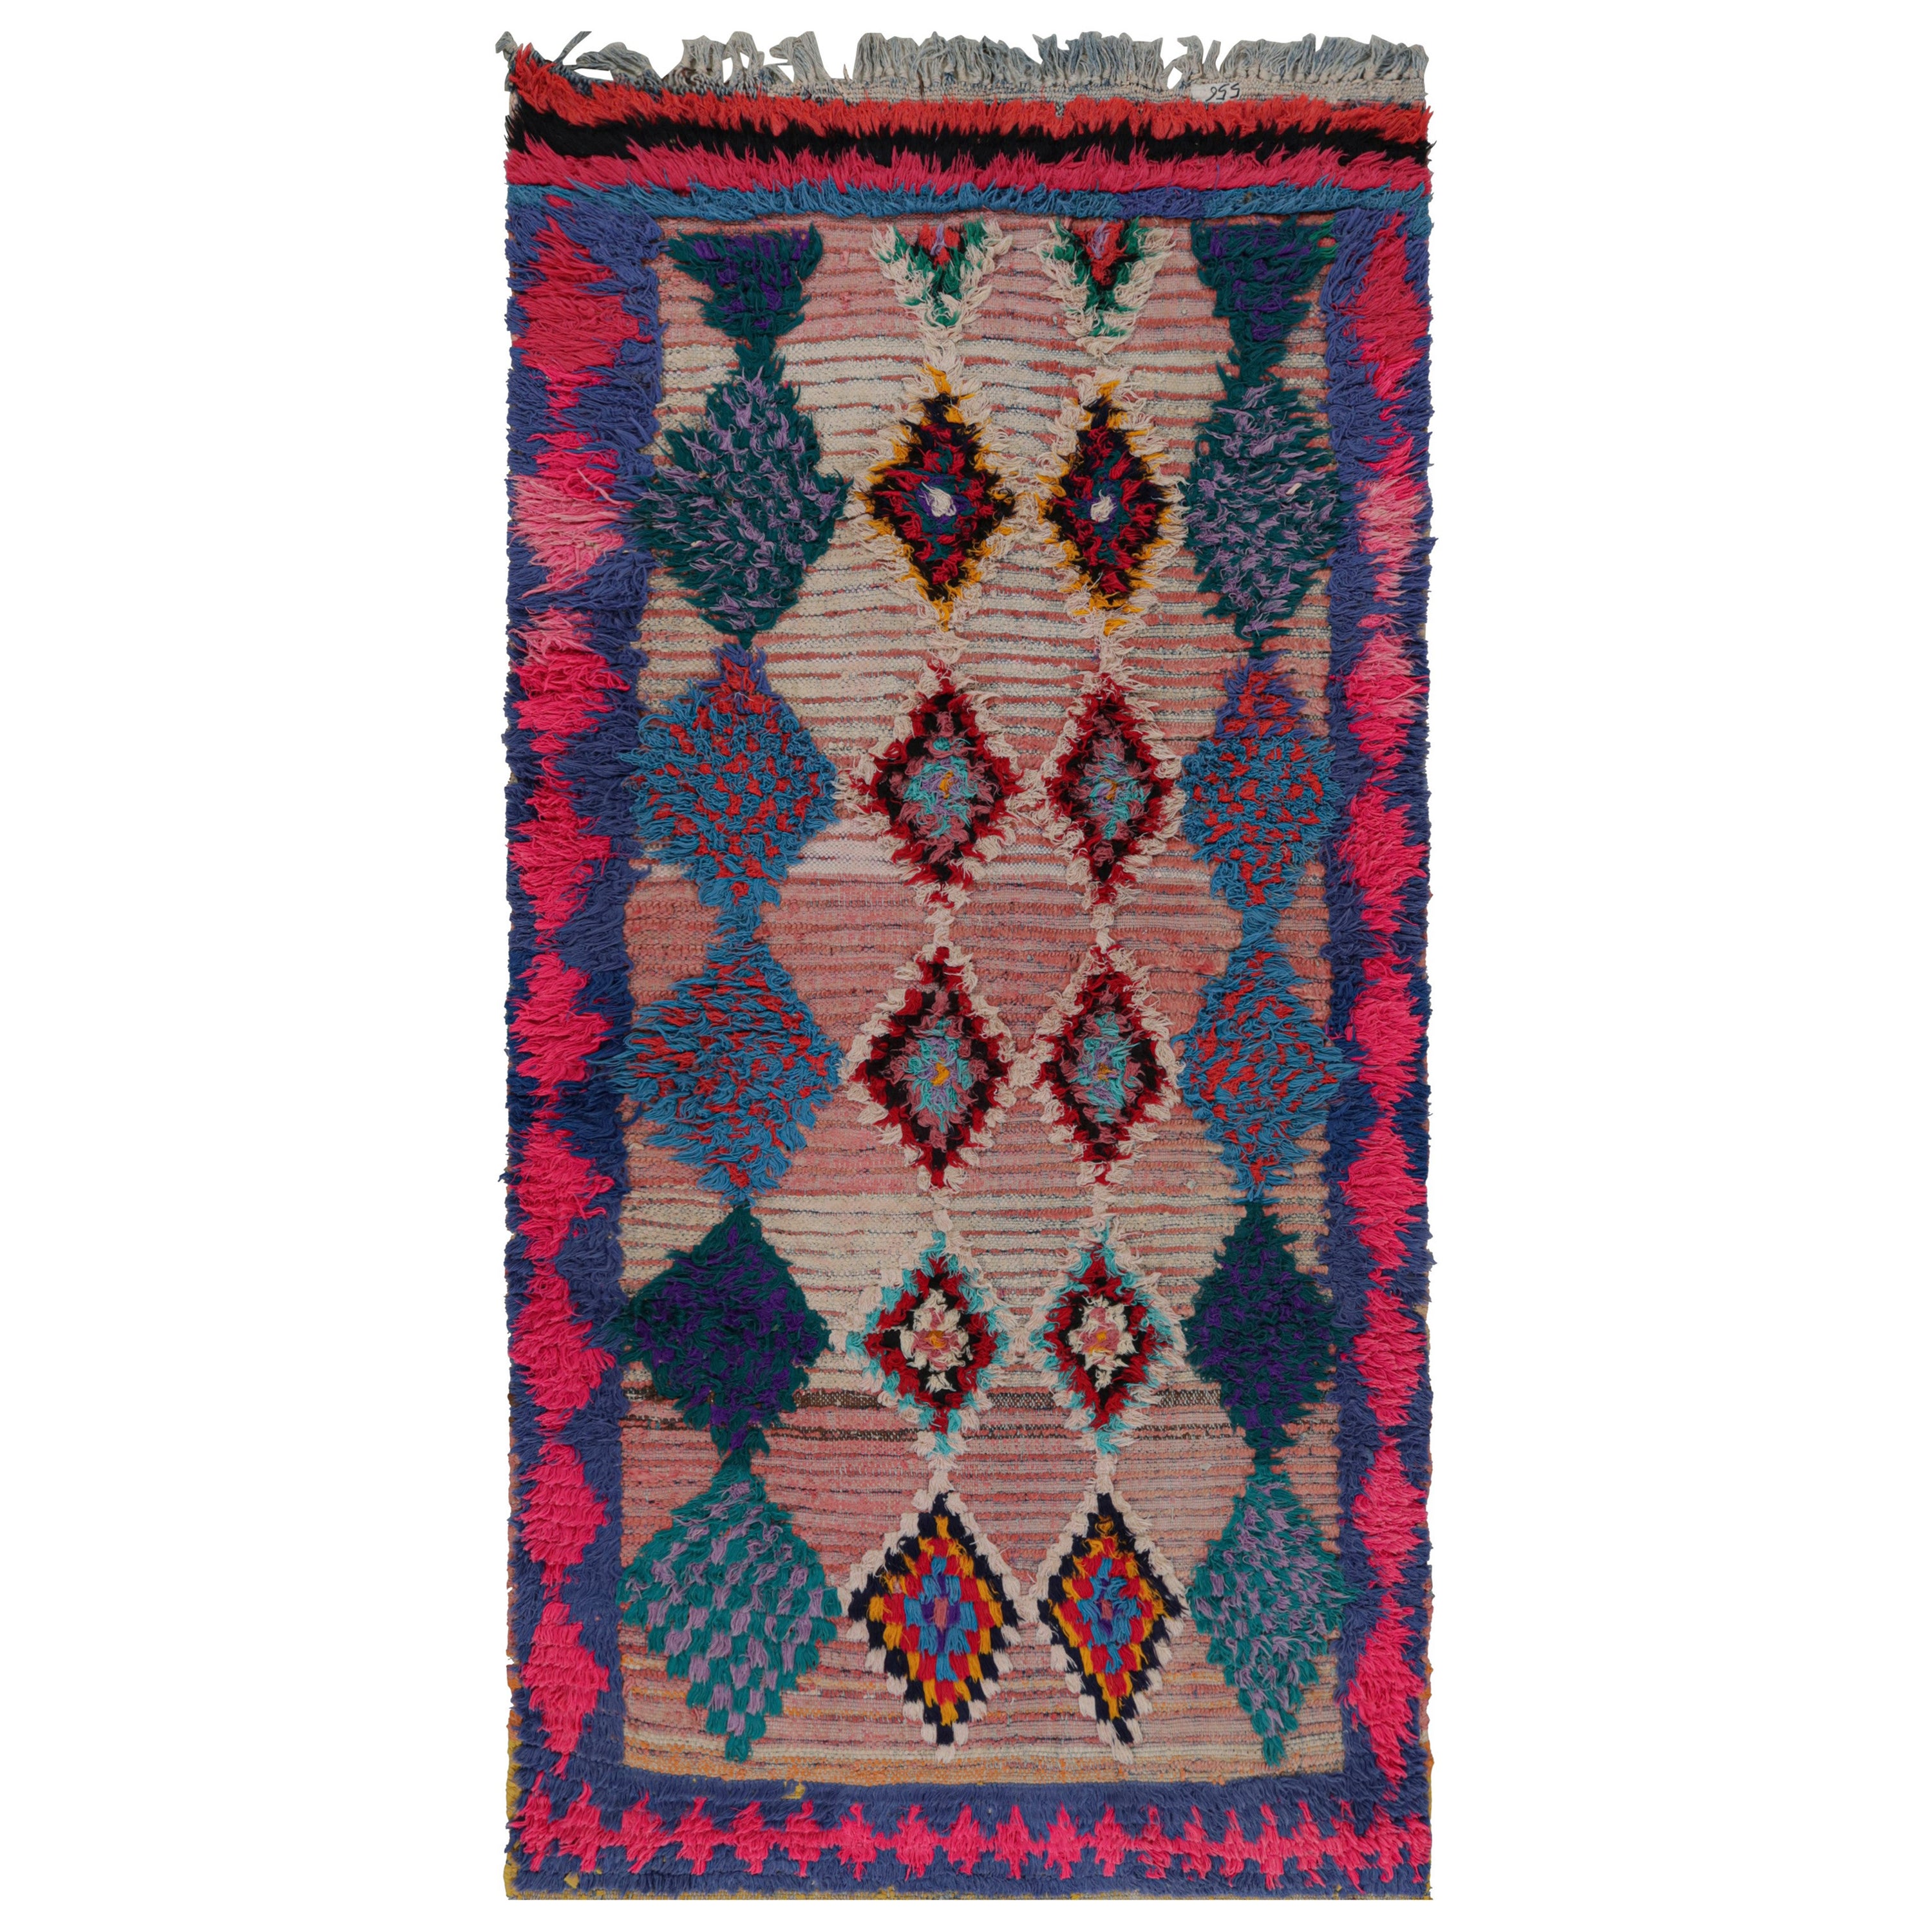 1950s Azilal Moroccan rug with Pink and Blue Patterns by Rug & Kilim